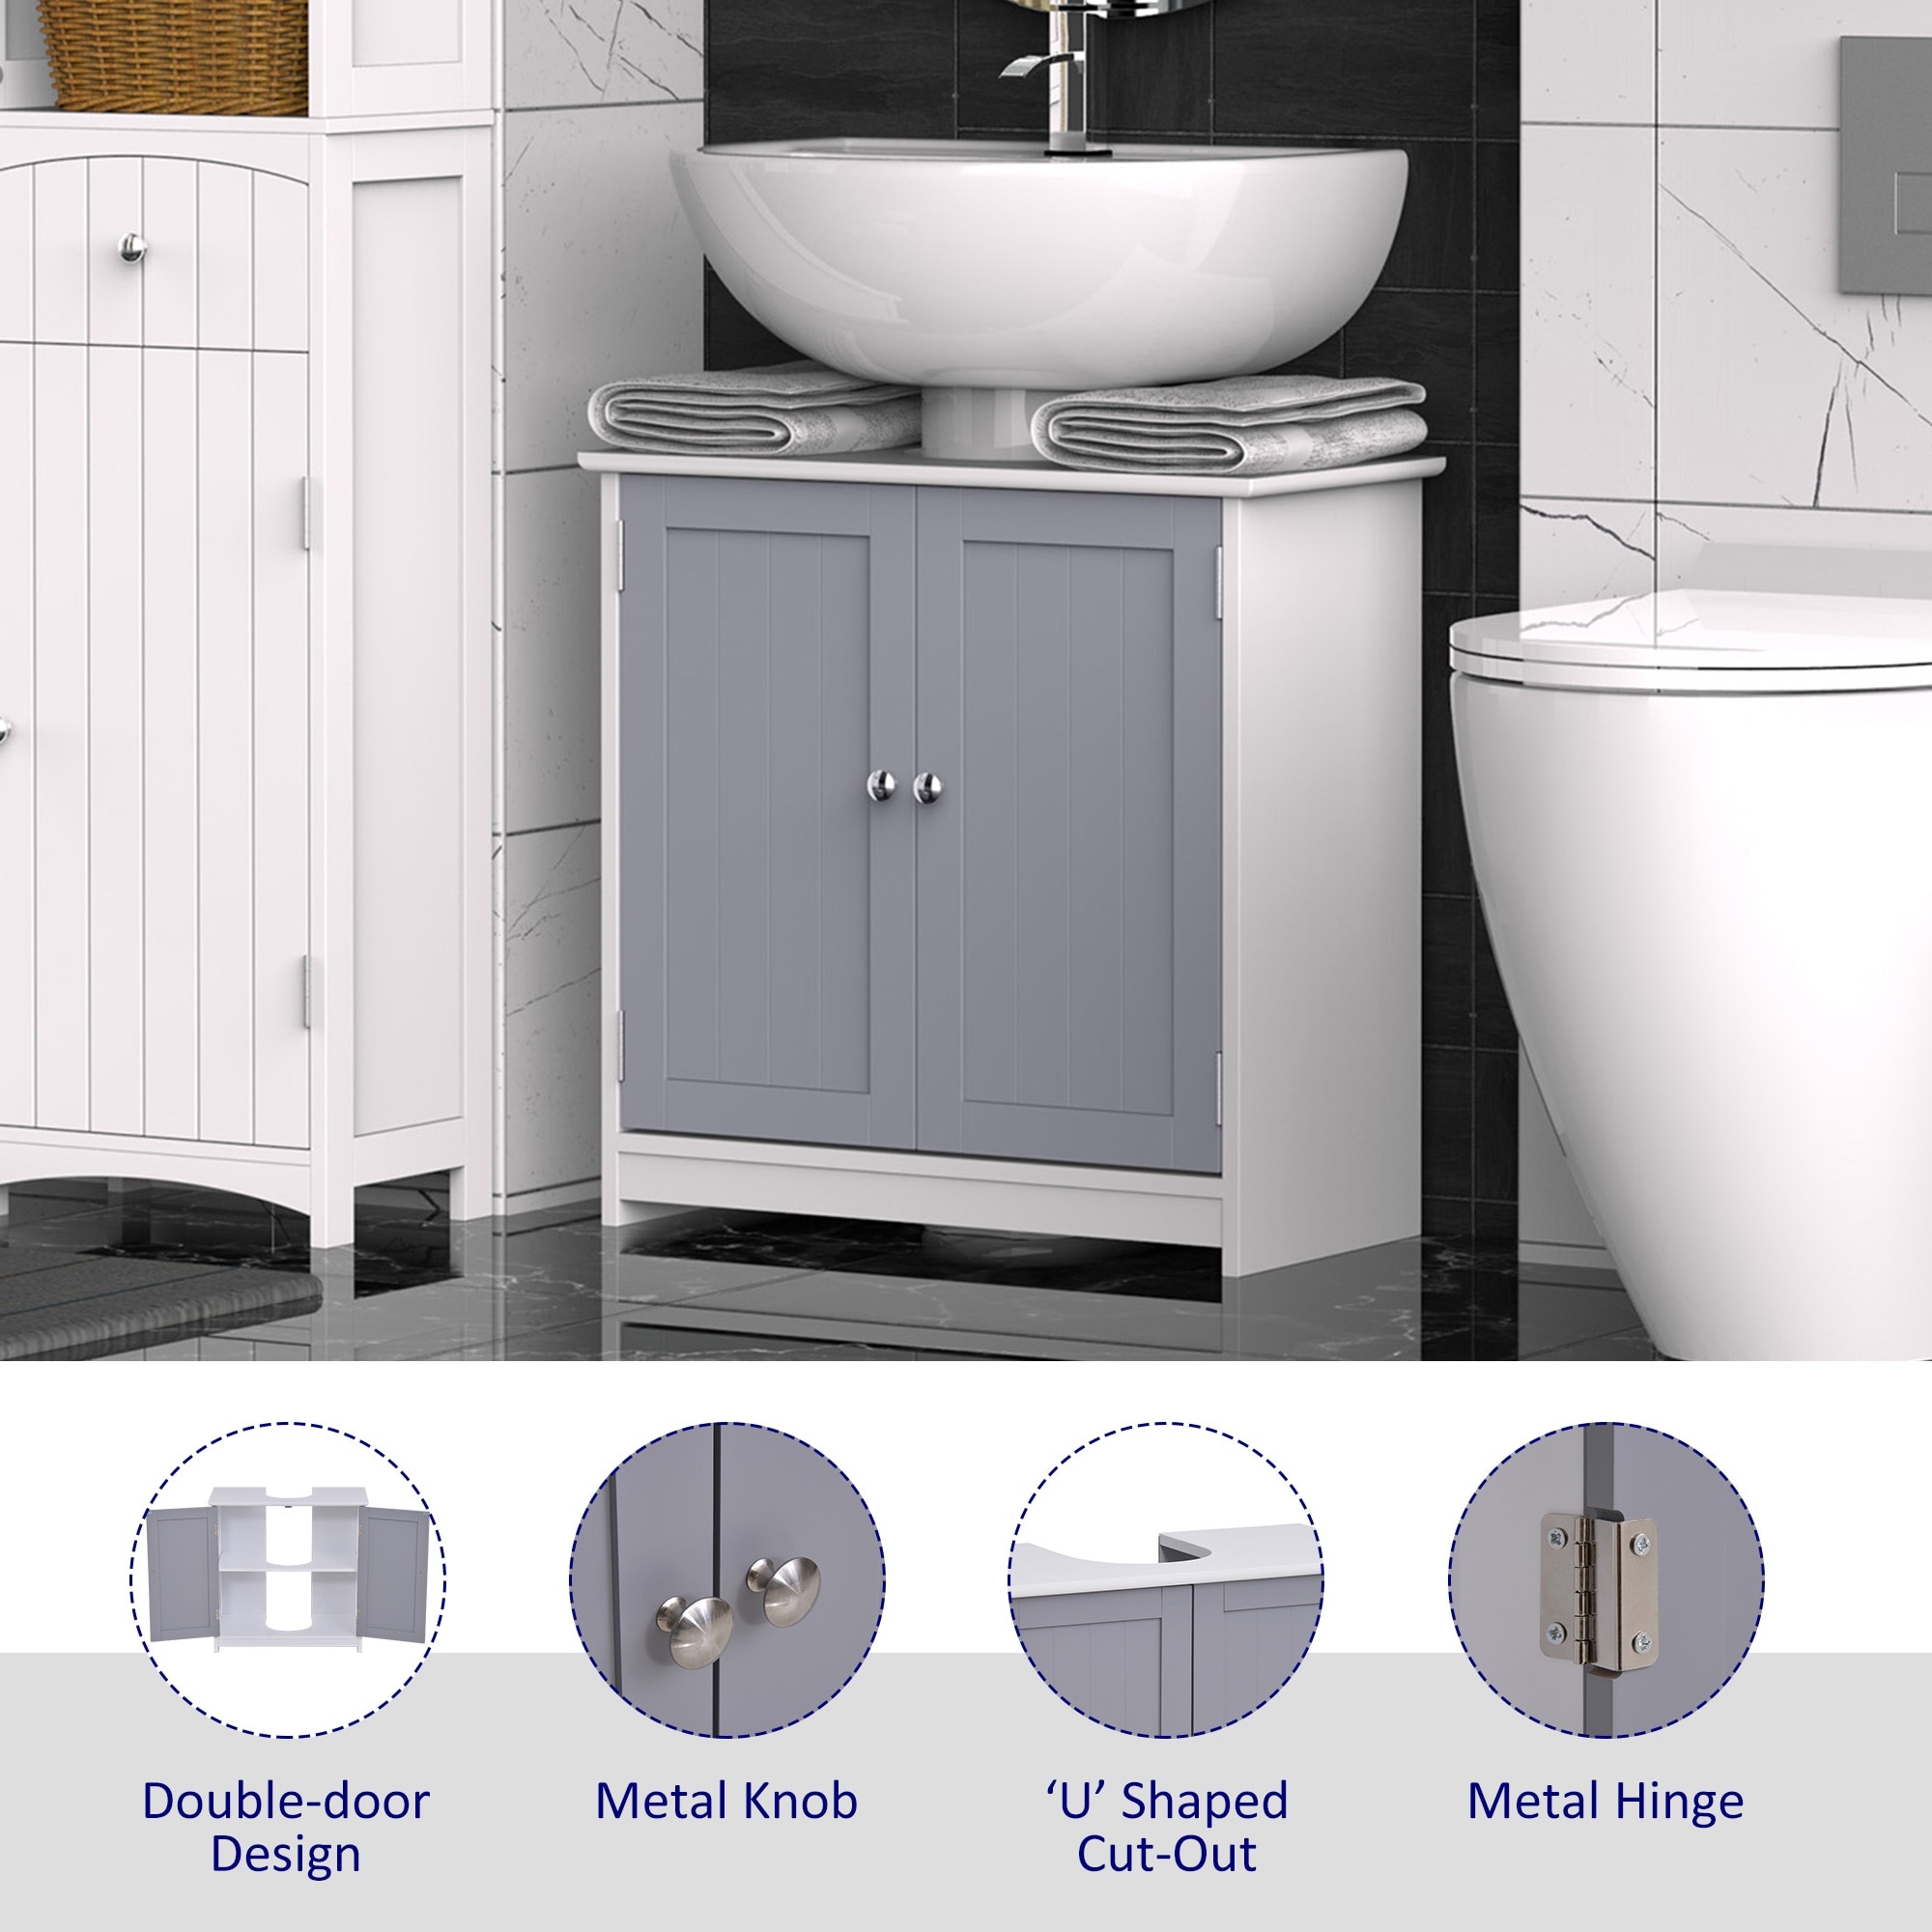 https://ak1.ostkcdn.com/images/products/is/images/direct/e383eeabfe20d14c9cdef15277219710817e5c90/kleankin-Vanity-Base-Cabinet%2C-Under-Sink-Bathroom-Cabinet-Storage-with-U-Shape-Cut-Out%2C-White-and-Grey.jpg